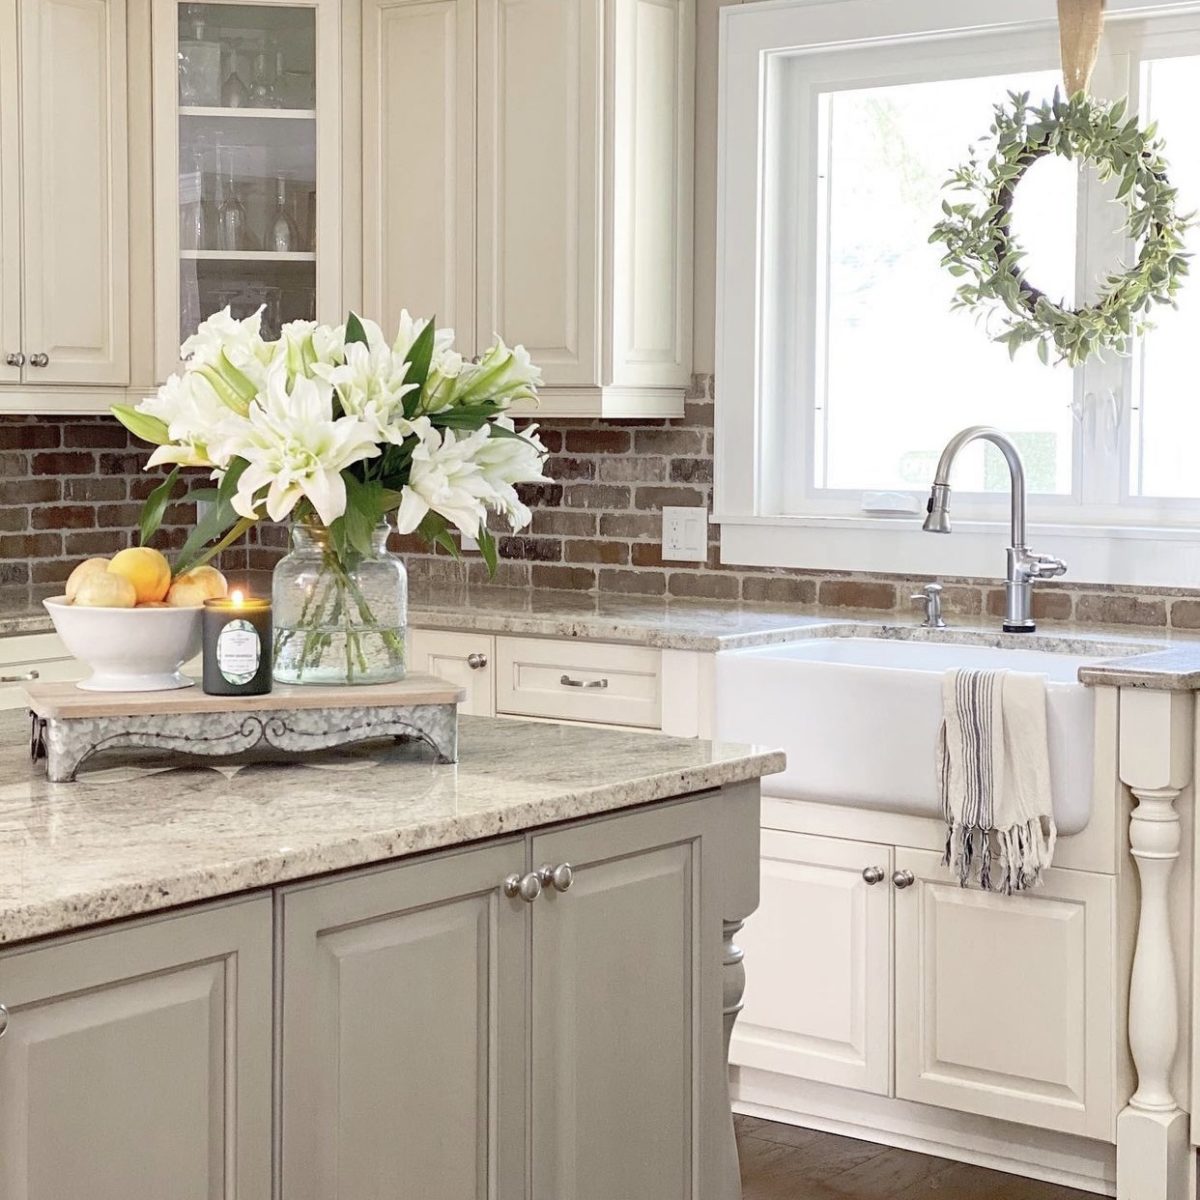 A view of the kitchen with the sink and brick backsplash in the background. There are flowers, fruit, and a candle lit on the kitchen island.